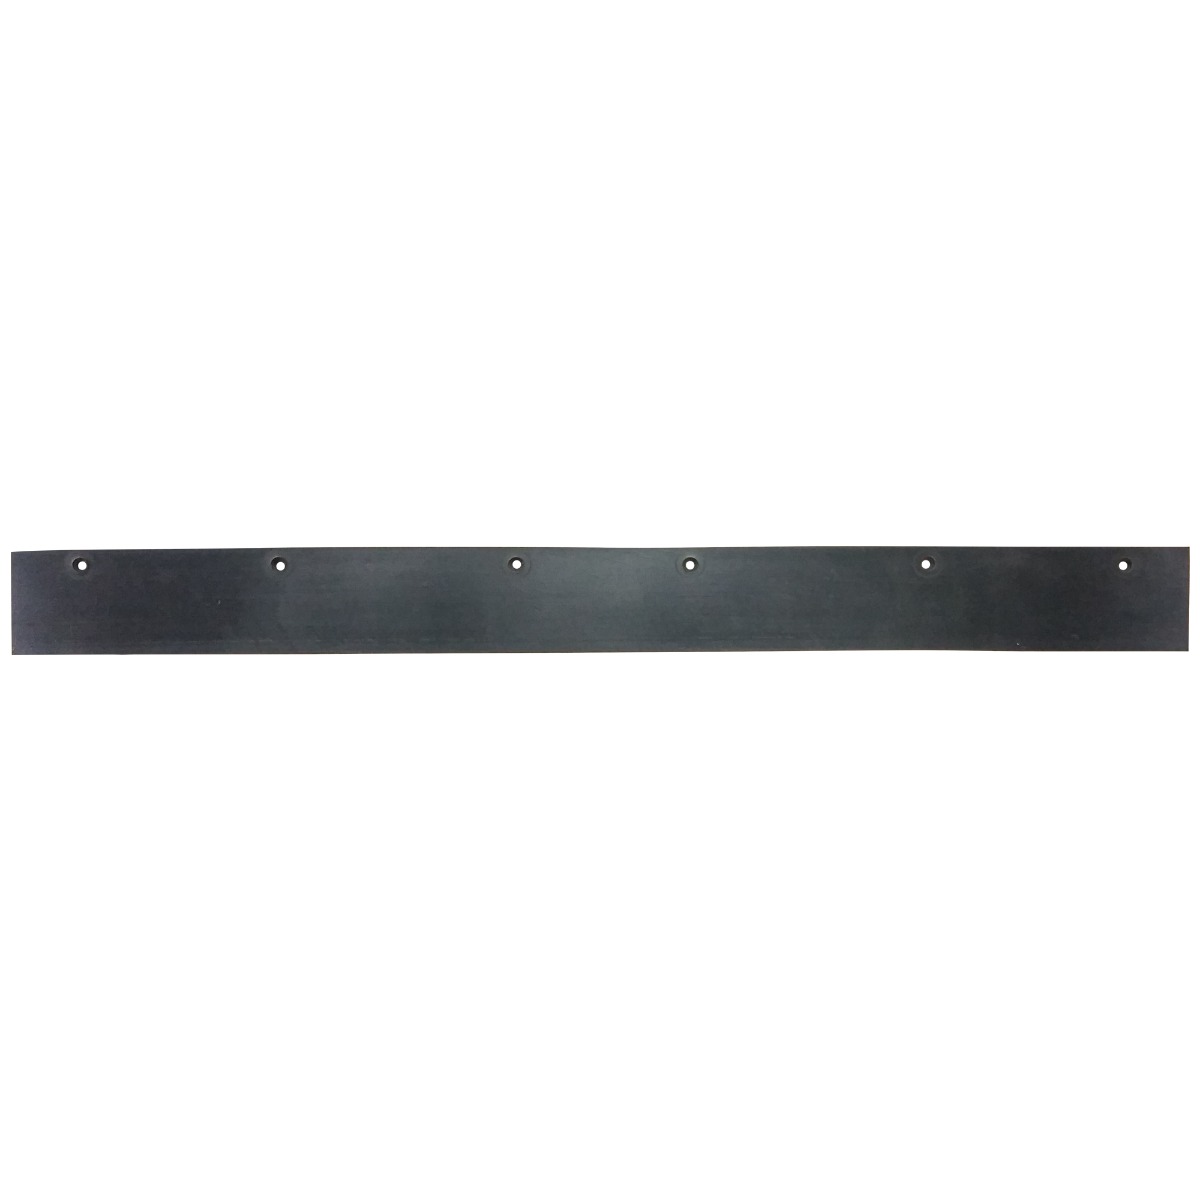 36" Rubber Refill Blade for Straight Blade Squeegee